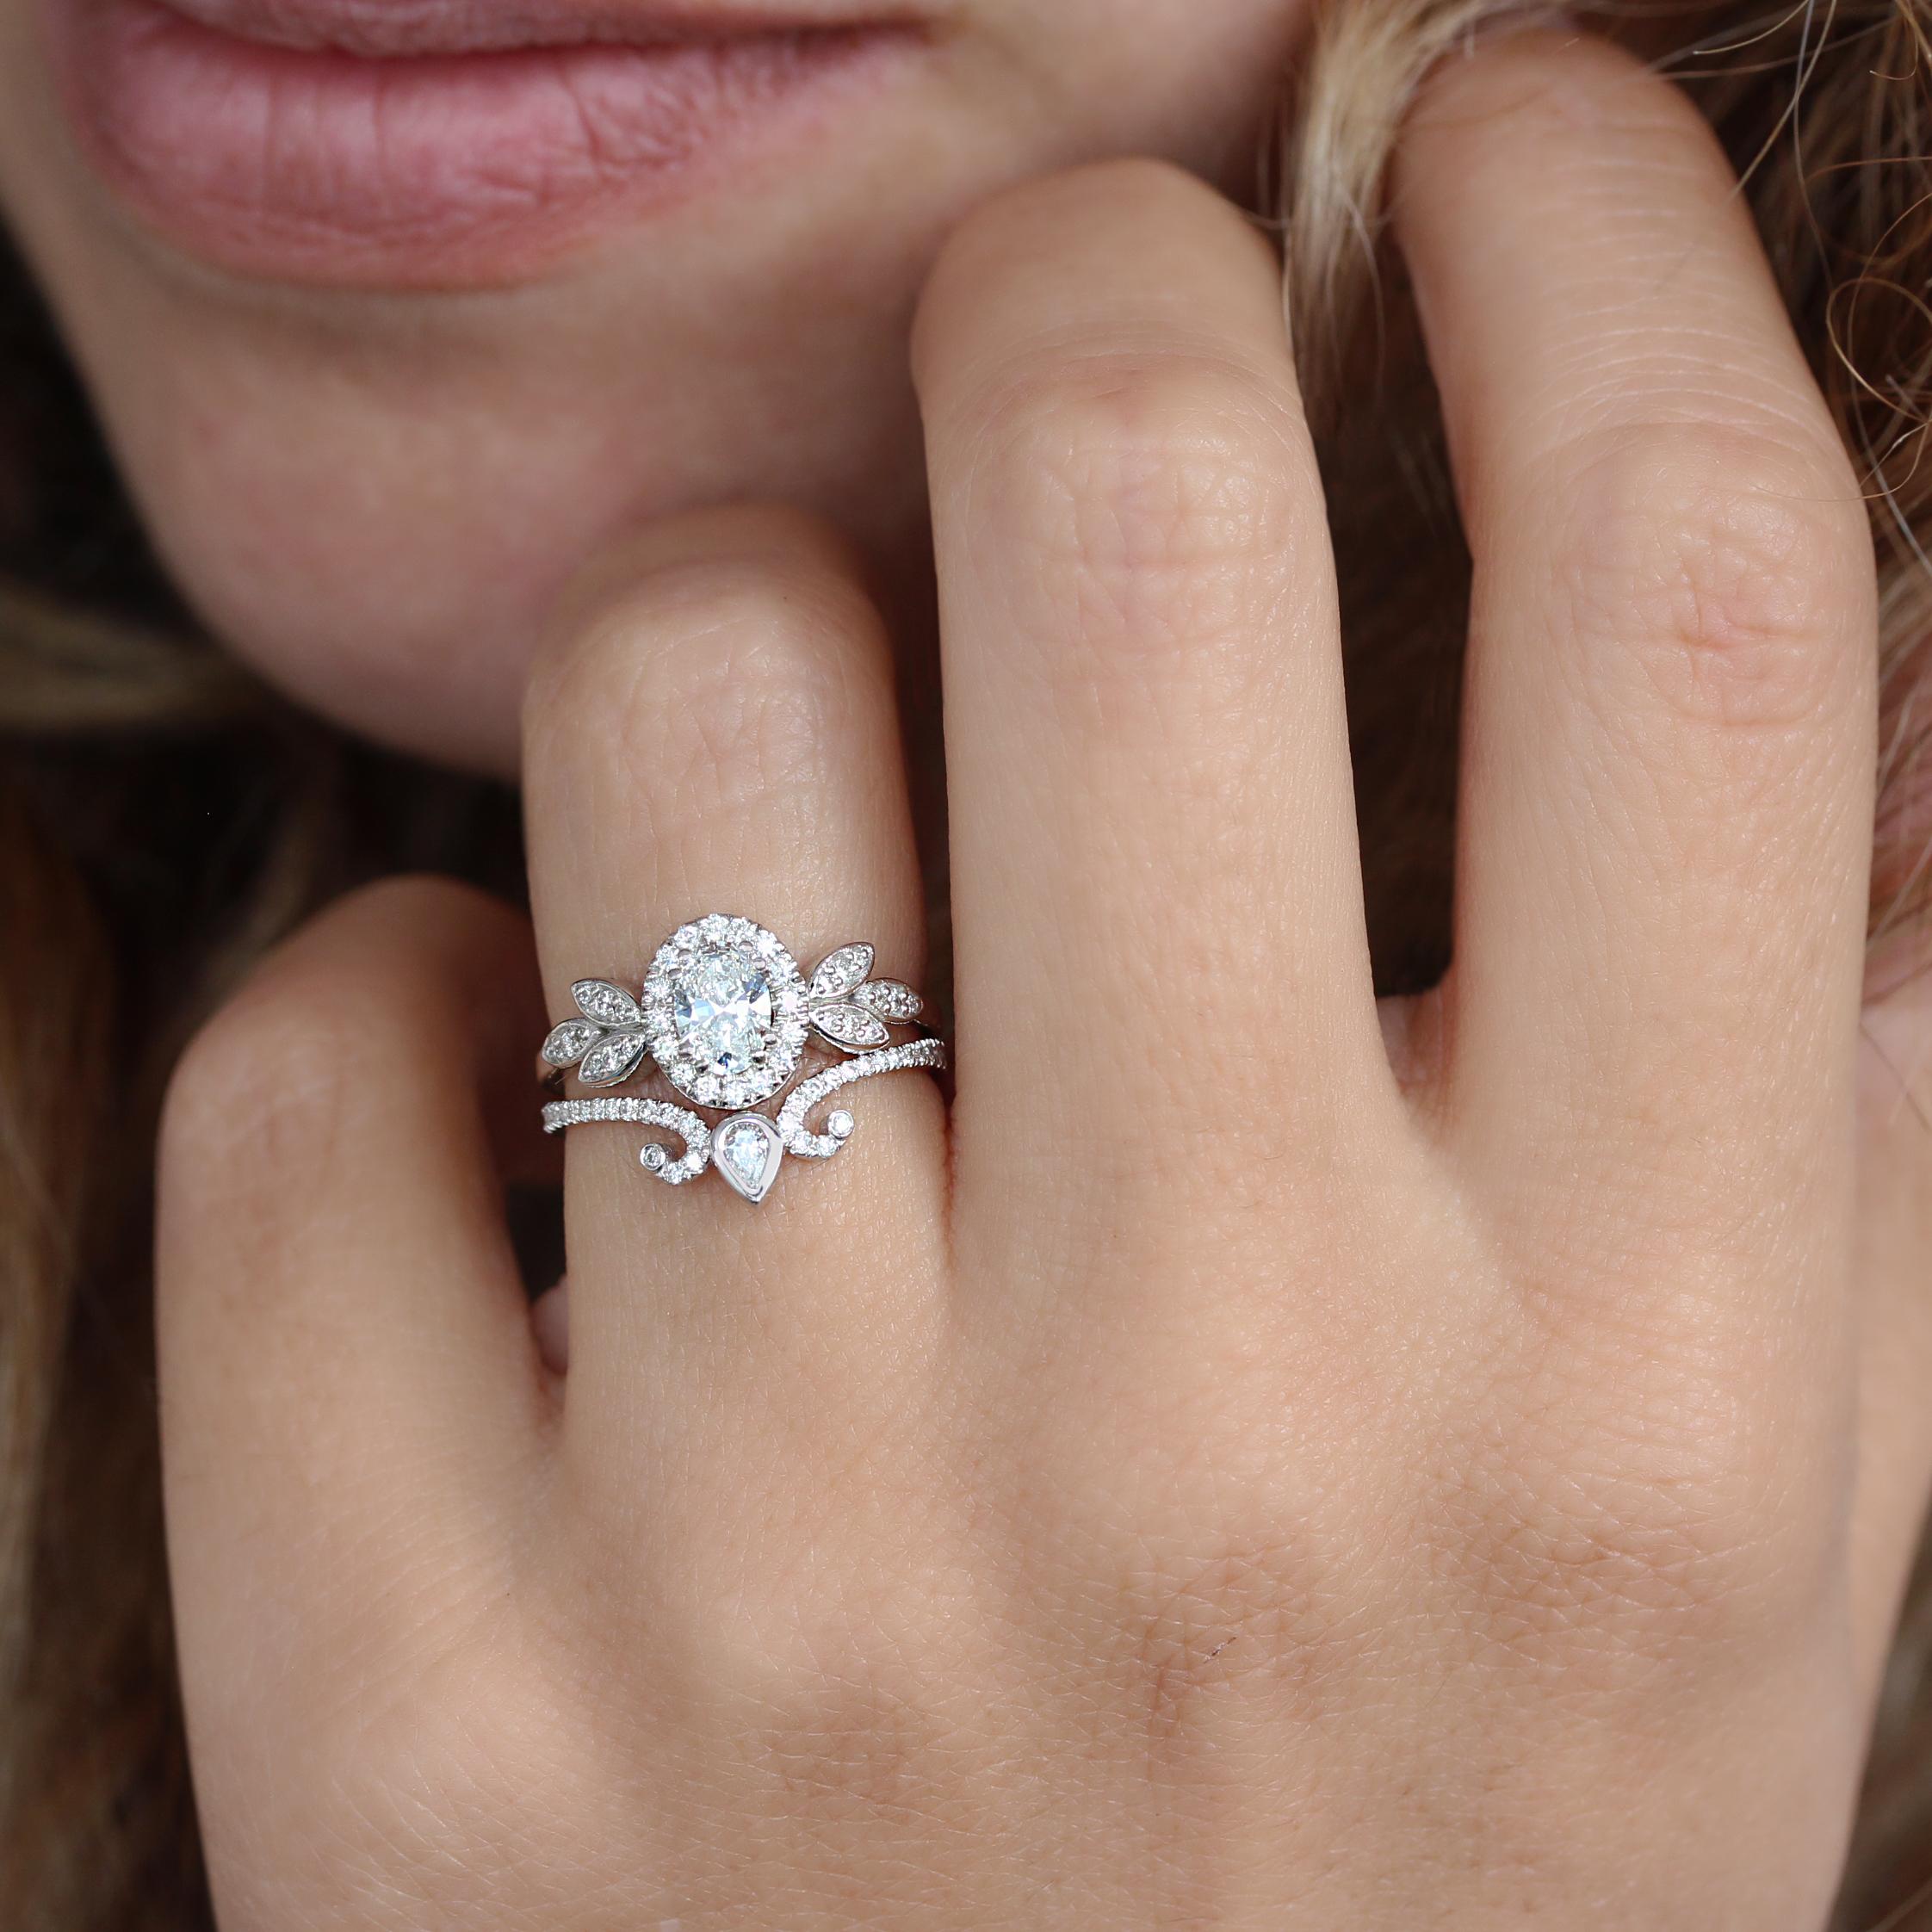 Floral oval diamond halo unique engagement ring - Minimal Lily.
The canter stone in the video is 1.0 carat.
This list is for the engagement ring only.
Handmade with care. 
An original design by Silly Shiny Diamonds. 

Details:
* Center stone shape: